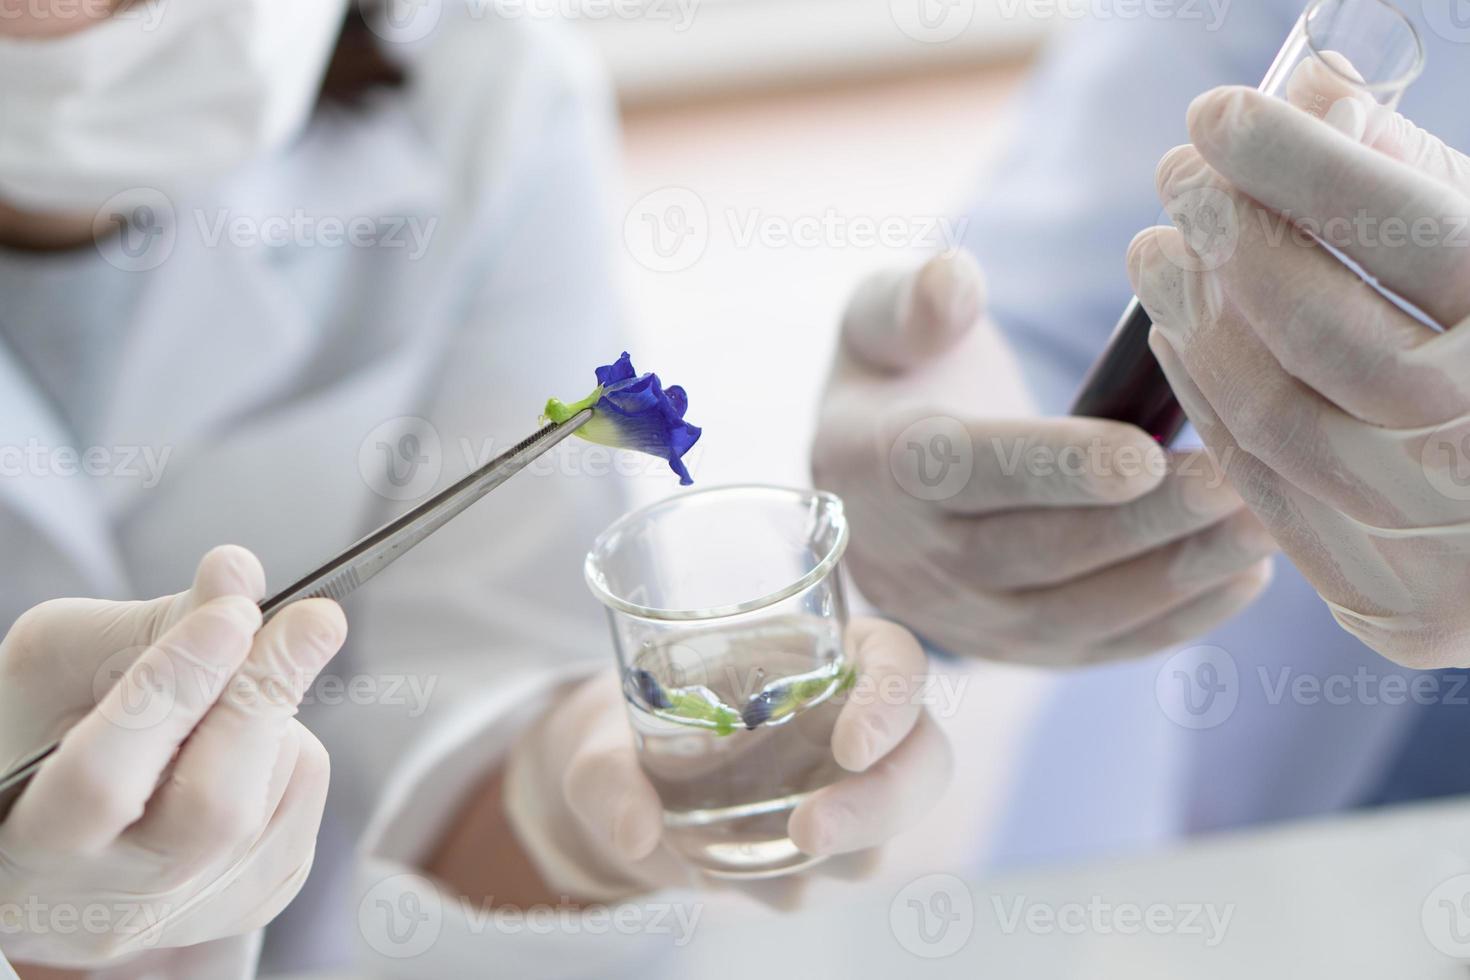 Scientists conducting an experiment on a plant photo